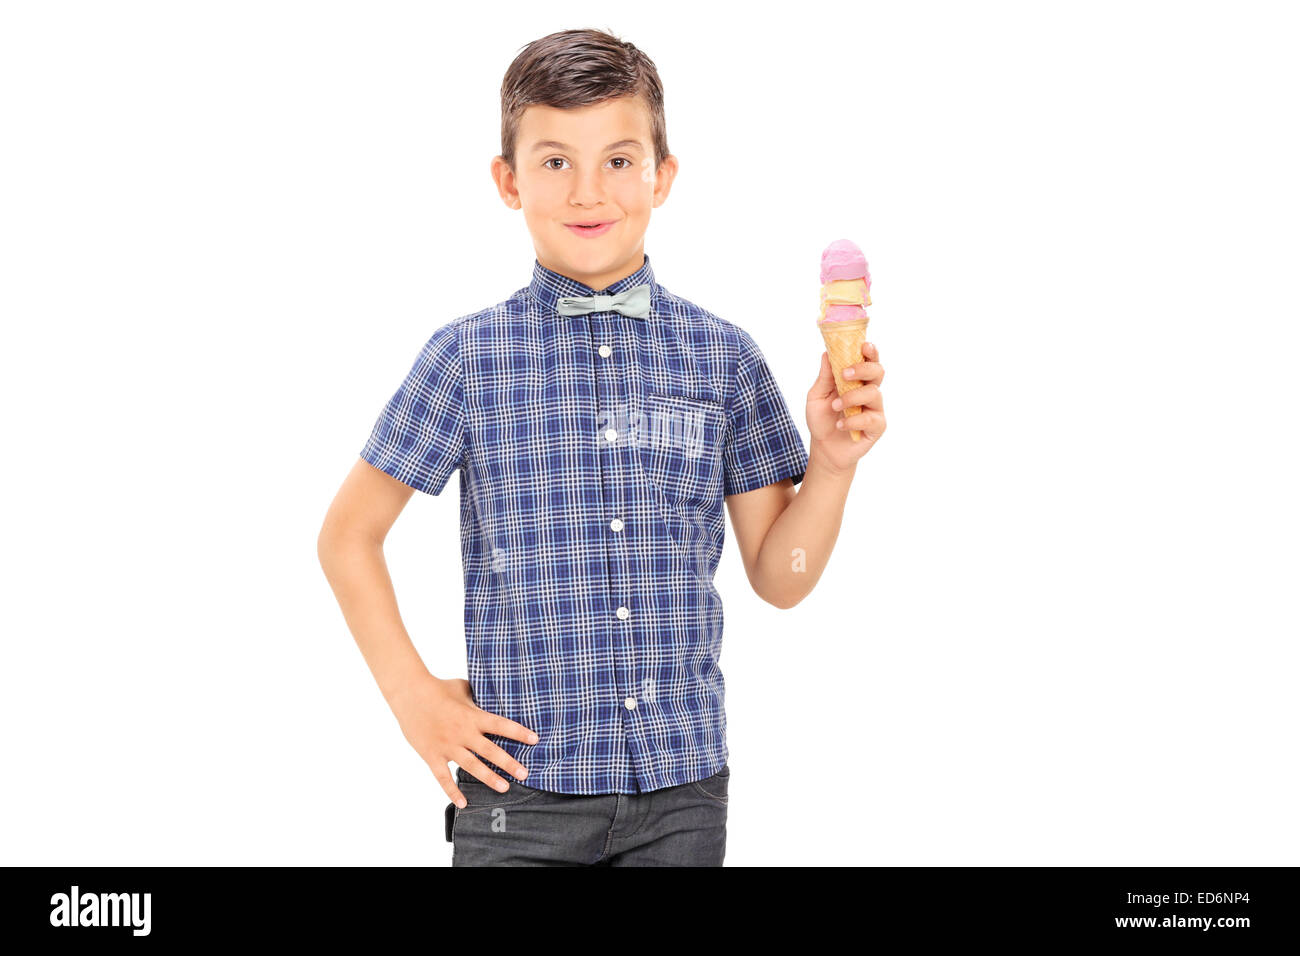 Youngster holding an ice cream cone isolated on white background Stock Photo